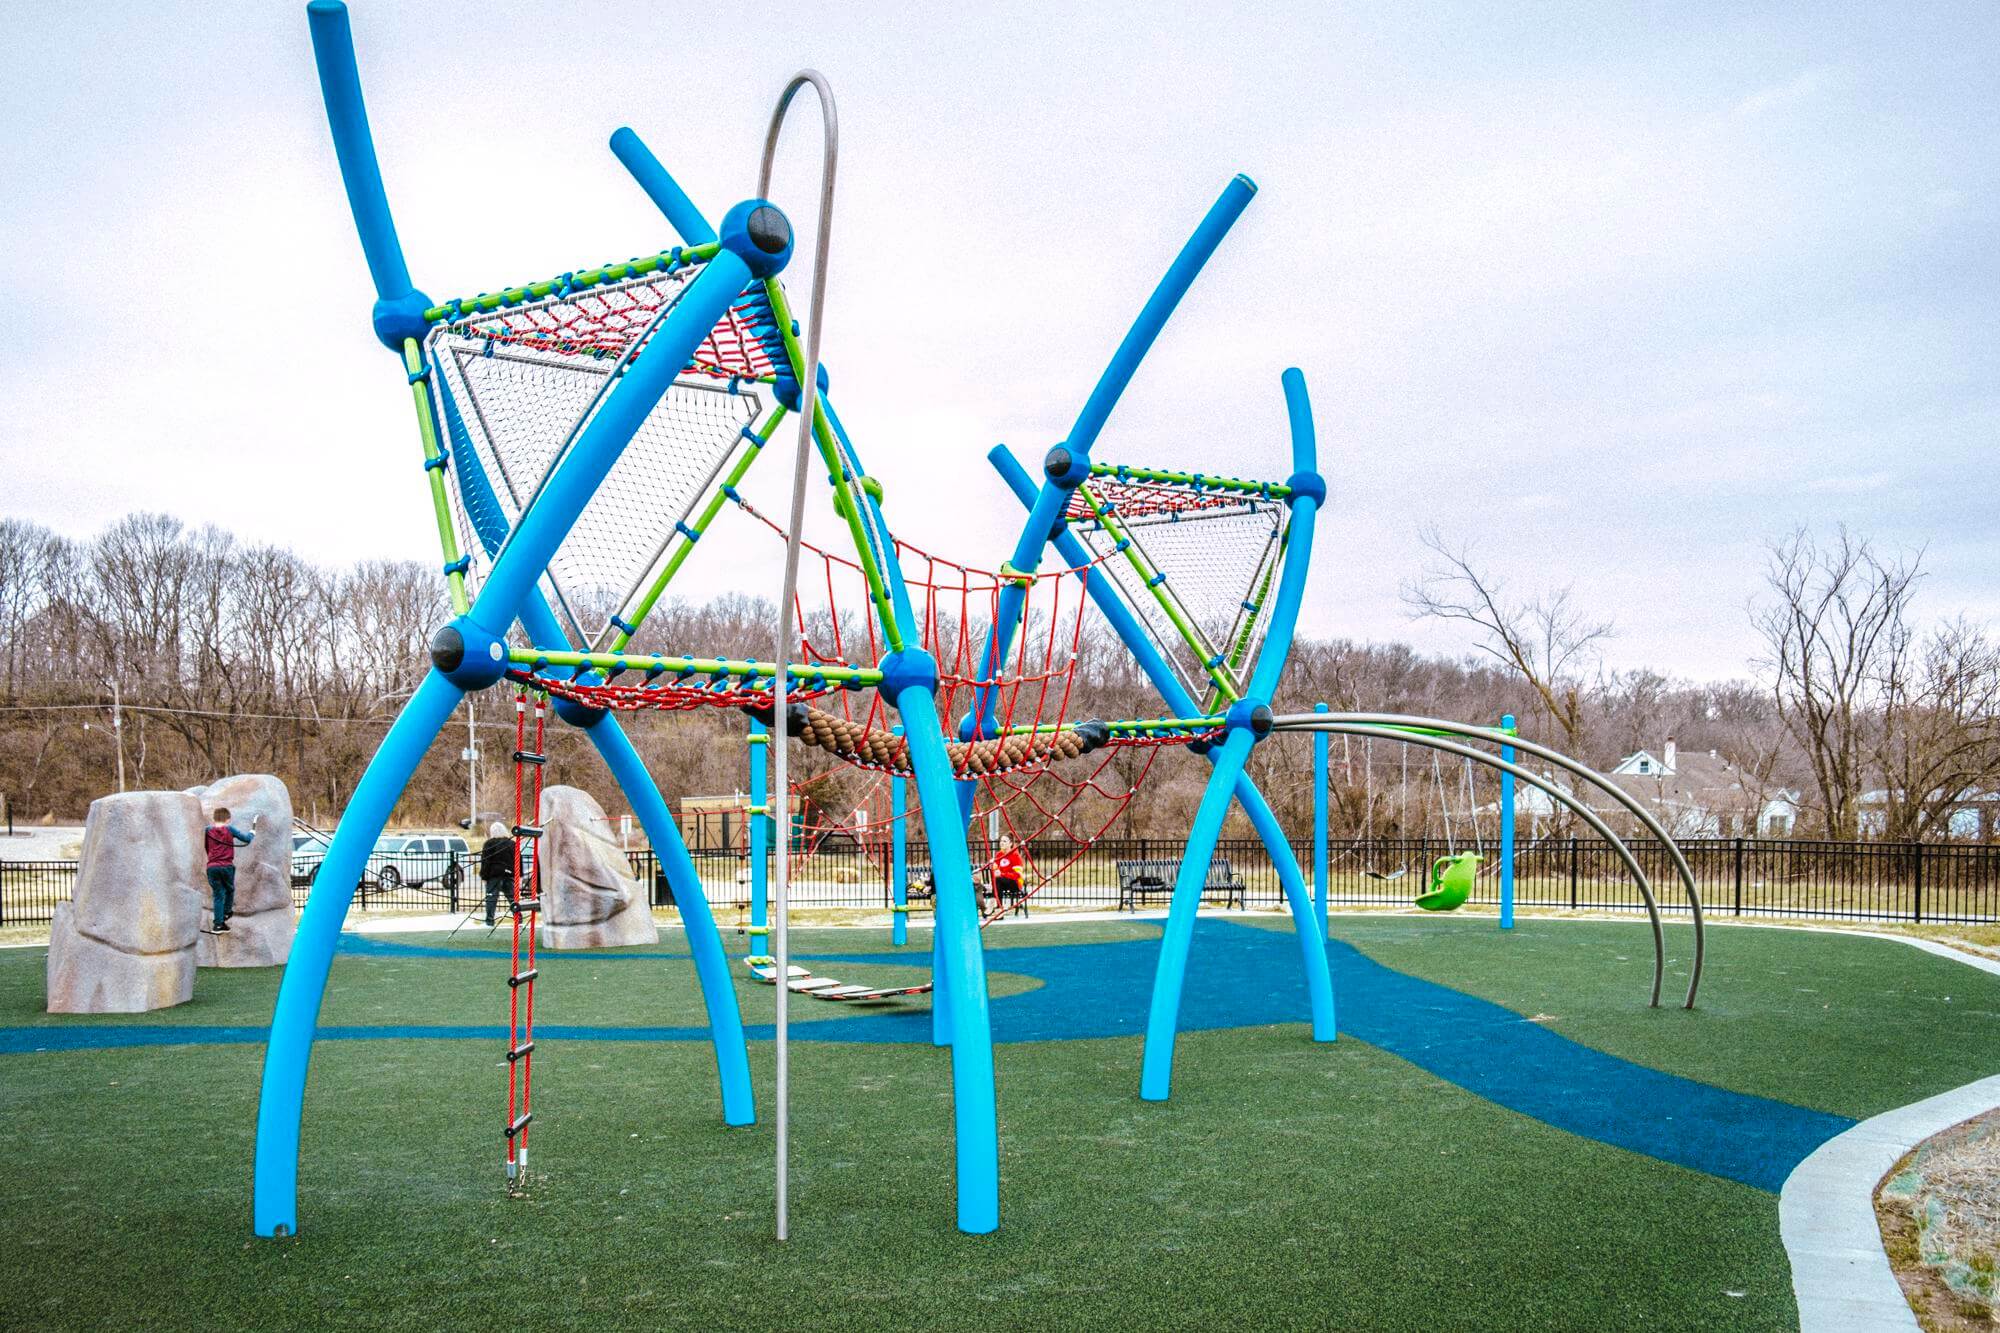 playground featuring a mix of green synthetic turf and blue pathways. In the foreground, three sculptural boulders equipped with climbing ropes and ladders are prominently displayed.